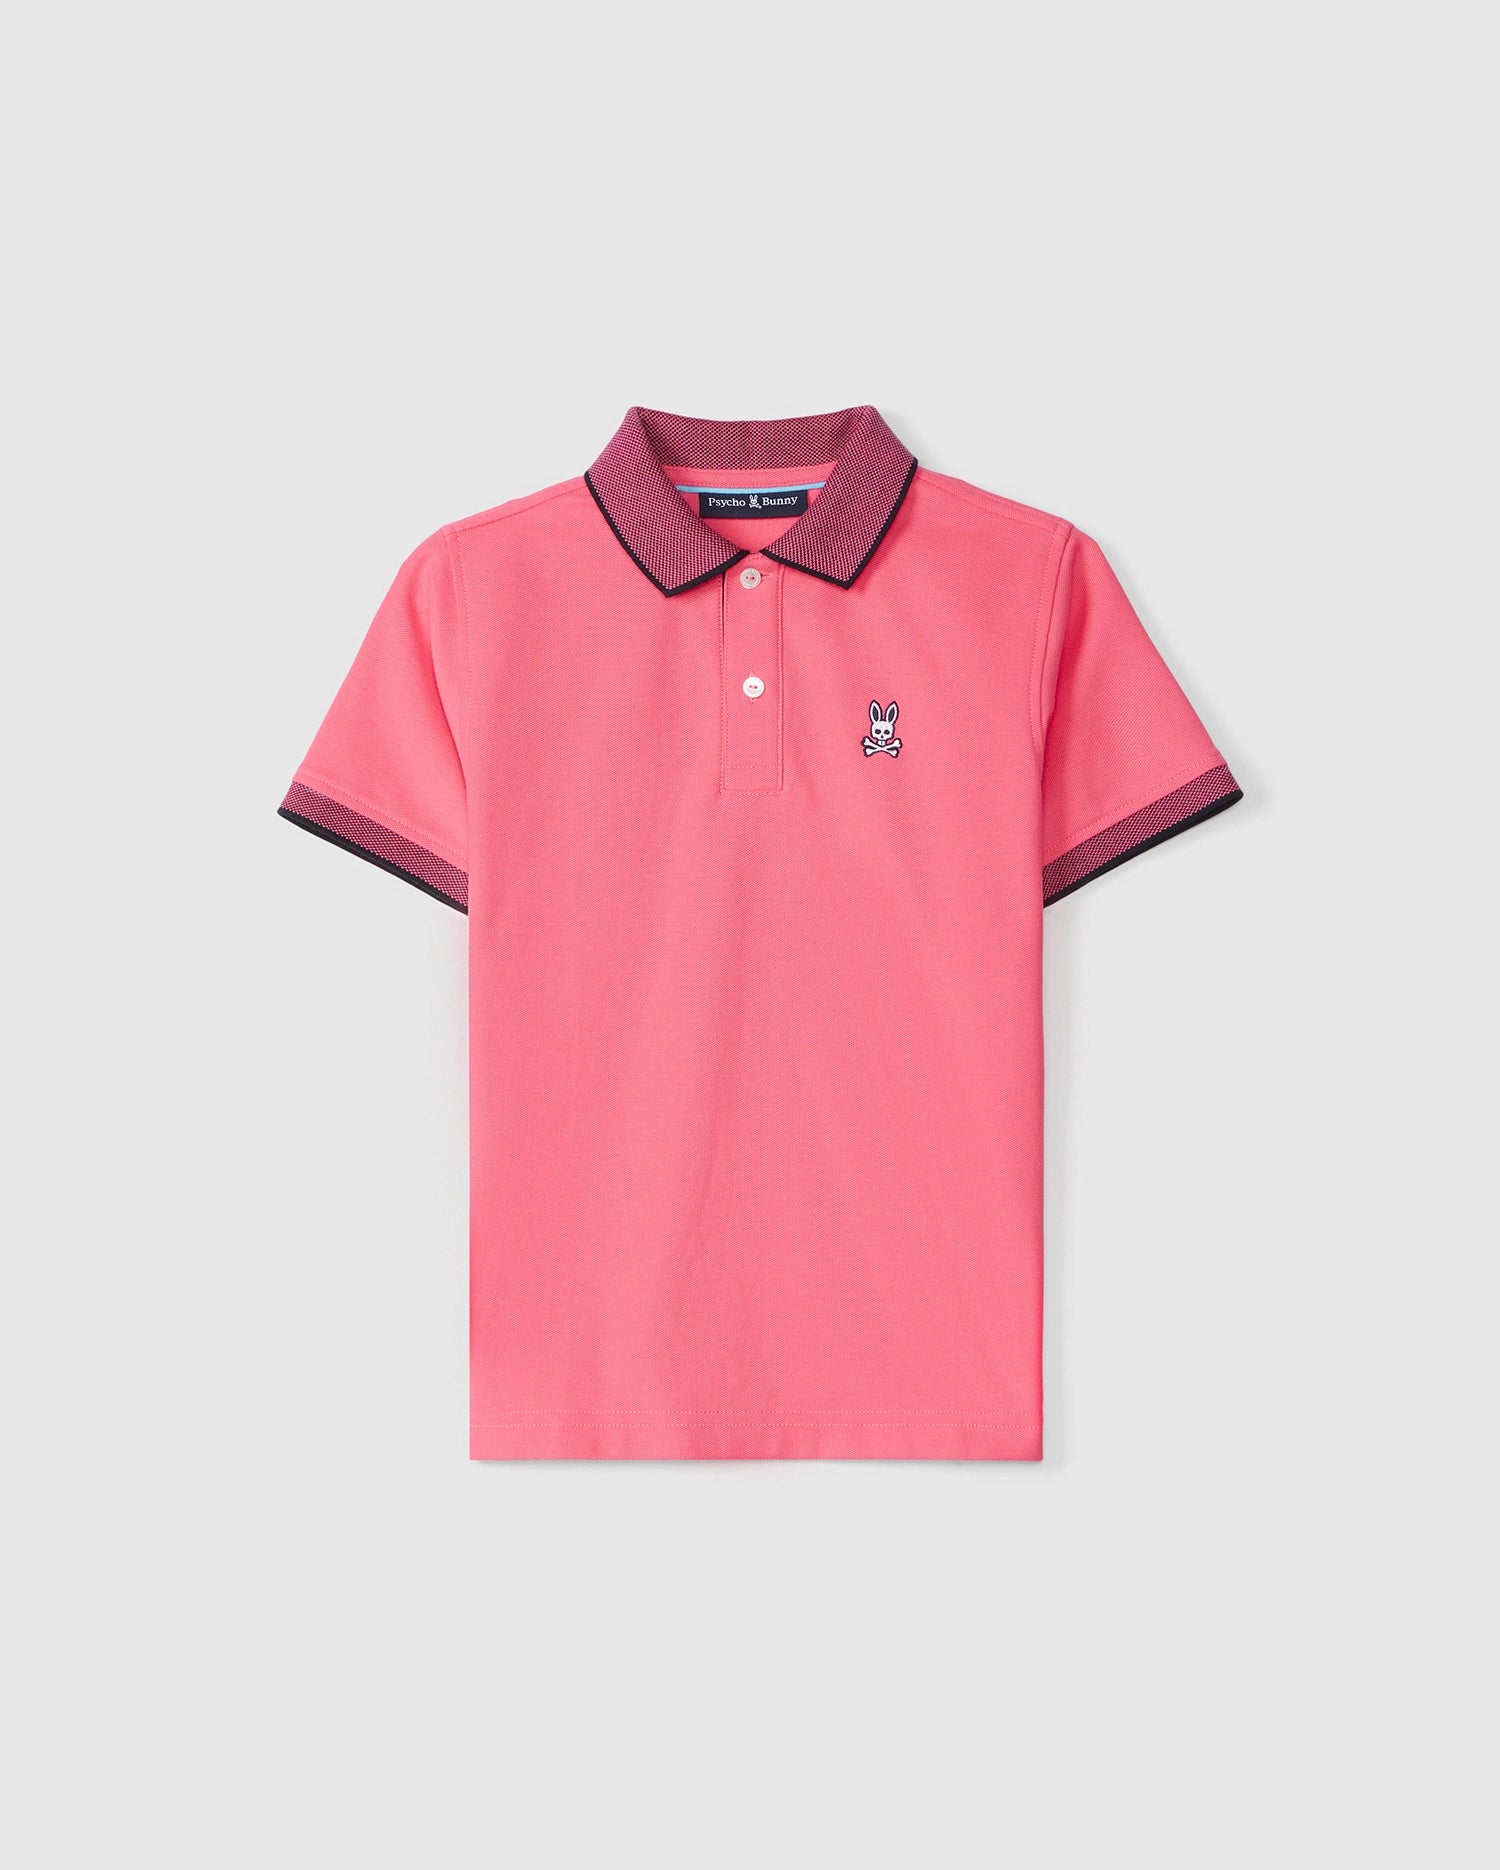 A kids' Psycho Bunny KIDS SOUTHPORT PIQUE POLO SHIRT - B0K263B200, this pink shirt boasts a dark purple collar and sleeve edges. The shirt features a small embroidered rabbit logo on the left chest and has a front button placket with two buttons. Made from Pima cotton piqué, it combines comfort with style for young fashion enthusiasts.